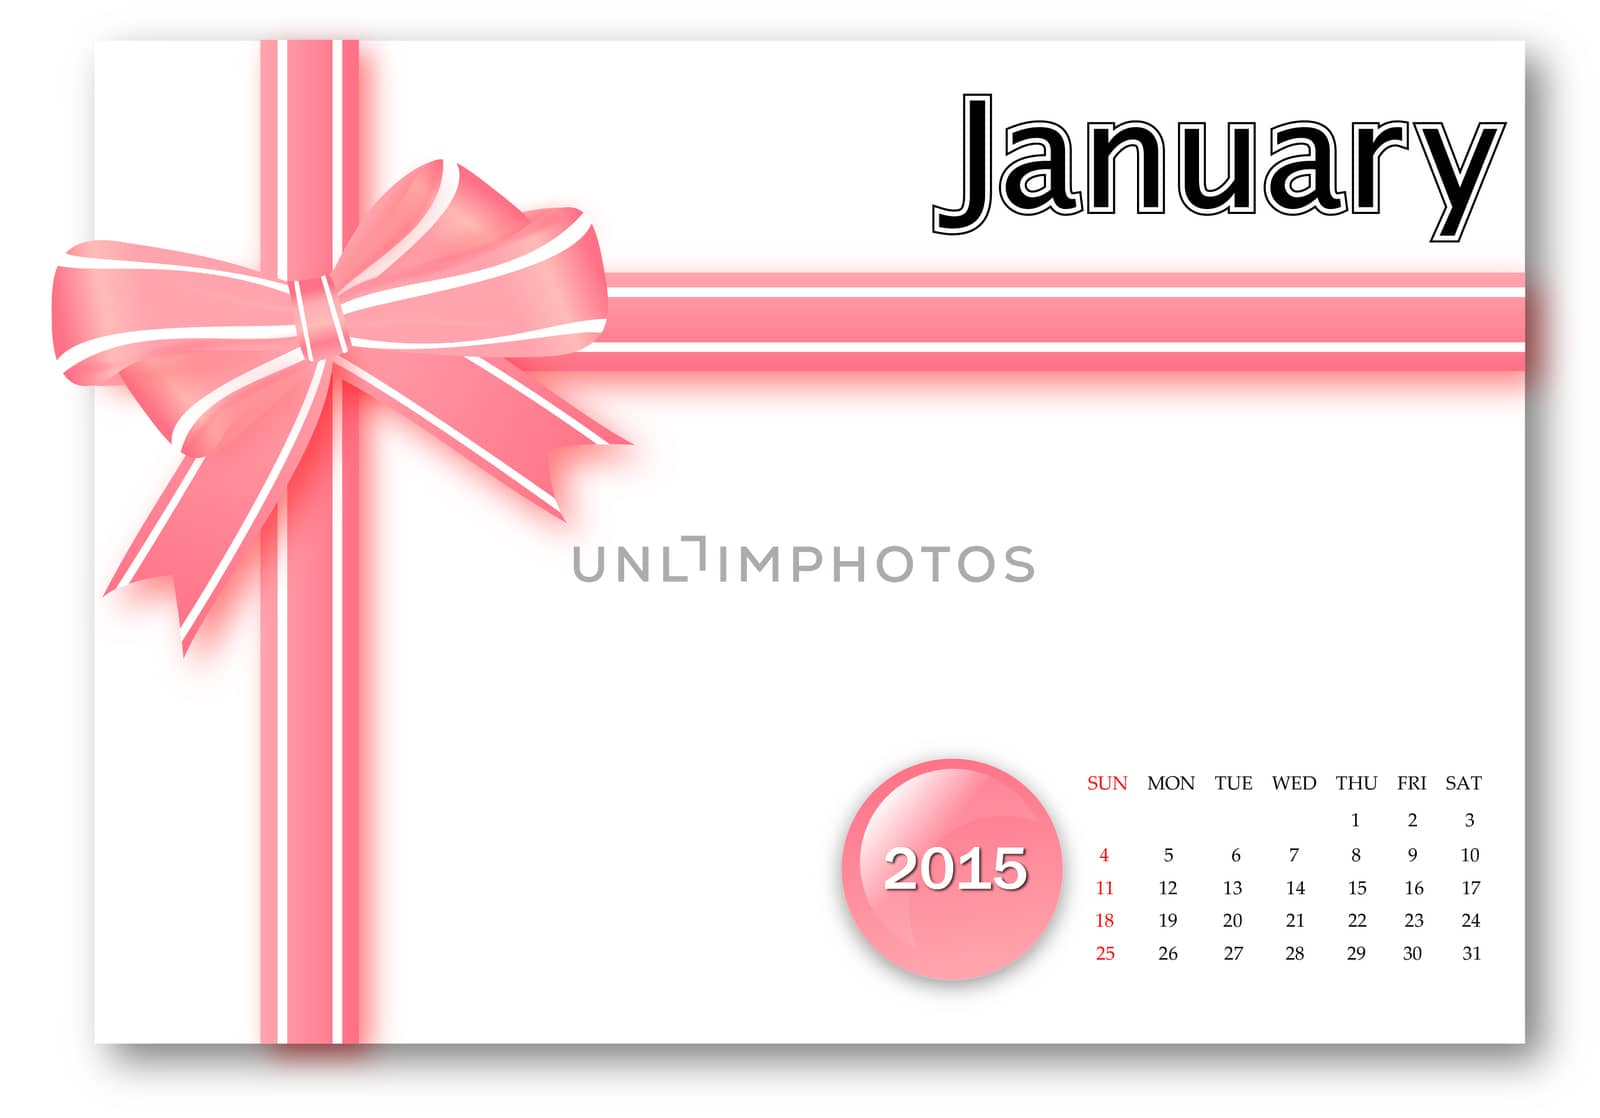 January 2015 - Calendar series with gift ribbon design